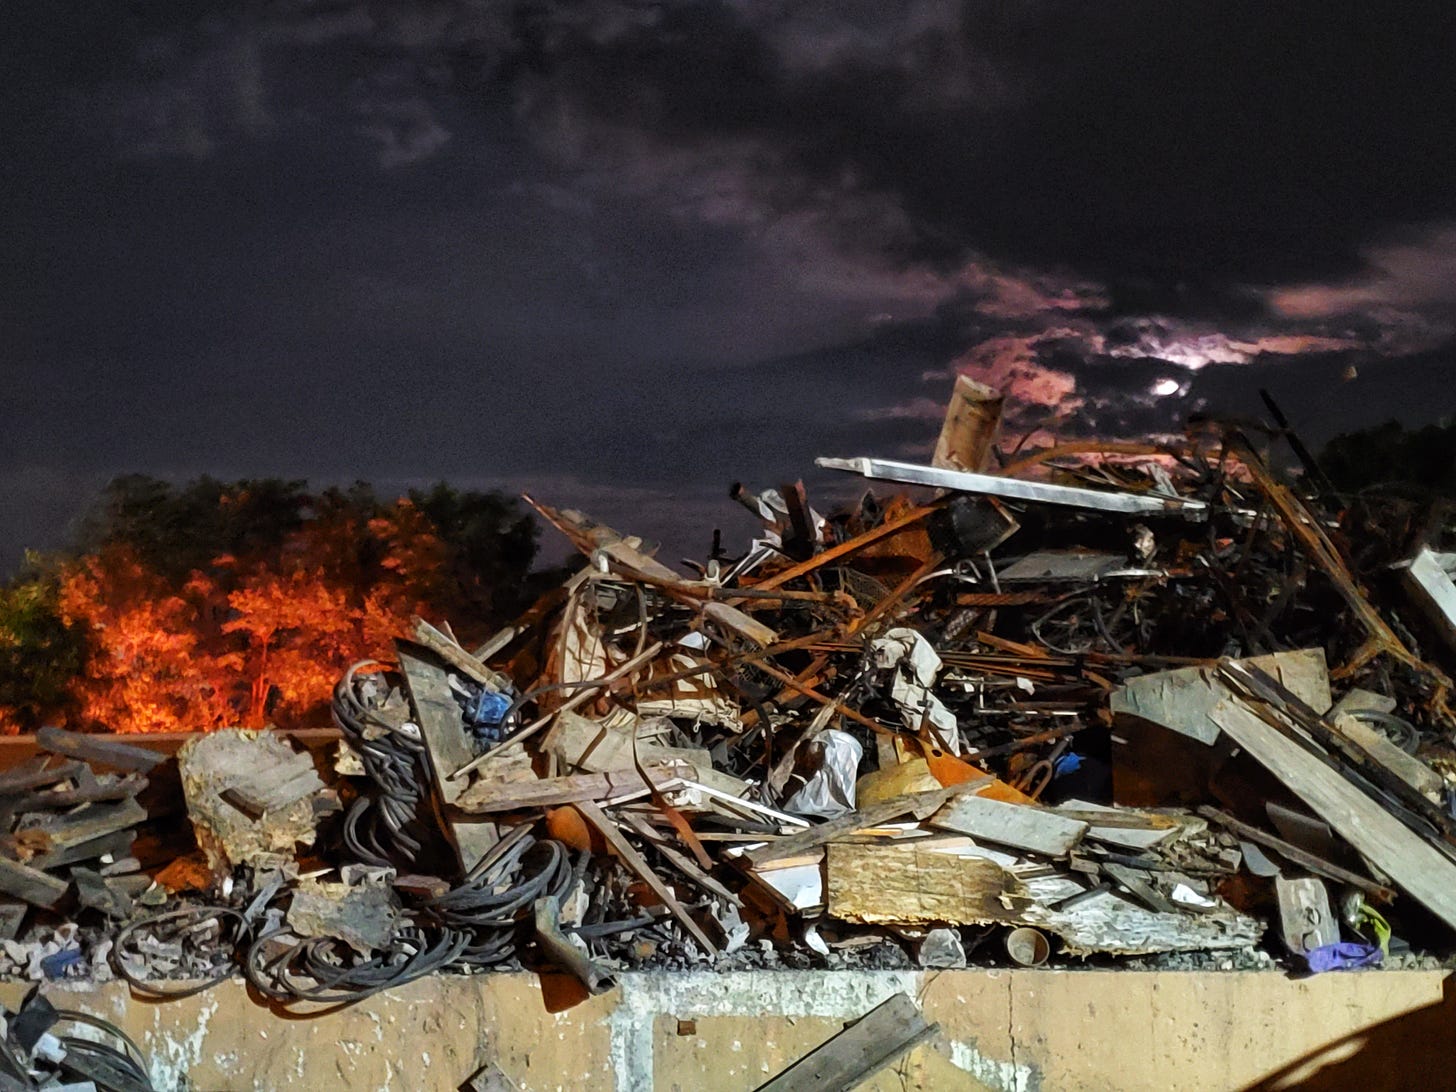 A pile of twisted and burned rubble rises in the foreground. The orange reflection of a fire lights up a cluster of trees in the background. Overhead, the night sky is lit by a nearly full moon.